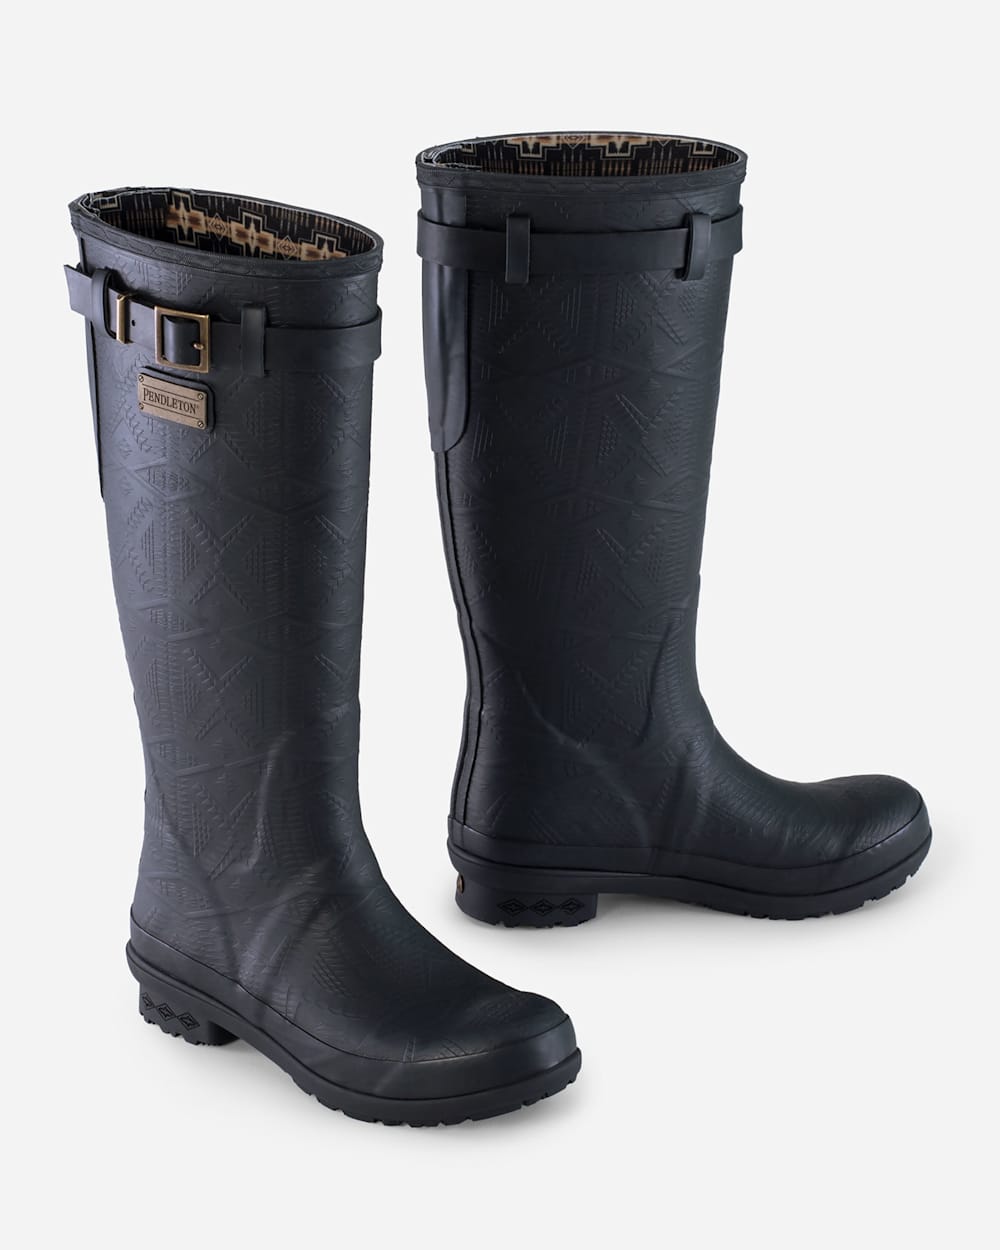 ALTERNATE VIEW OF HERITAGE EMBOSSED TALL RAIN BOOTS IN BLACK image number 2